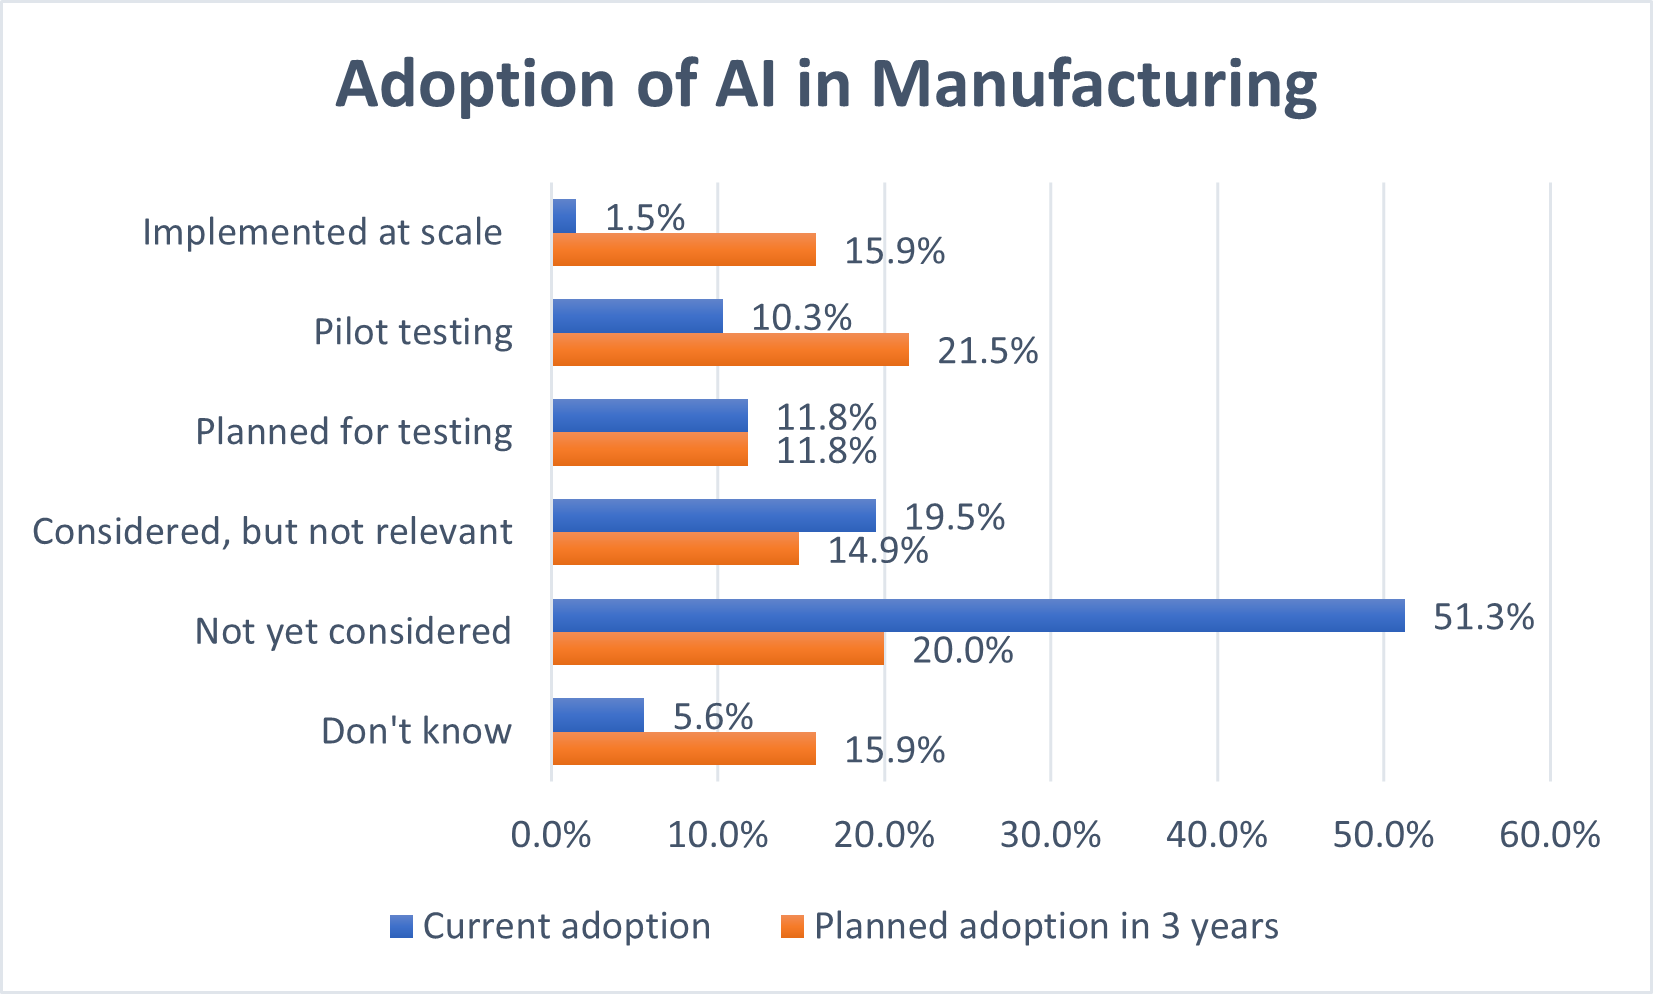 Enlarged view: Chart on Adoption of AI in Manufacturing with Current adoption rate and planned adoption in 3 years rate